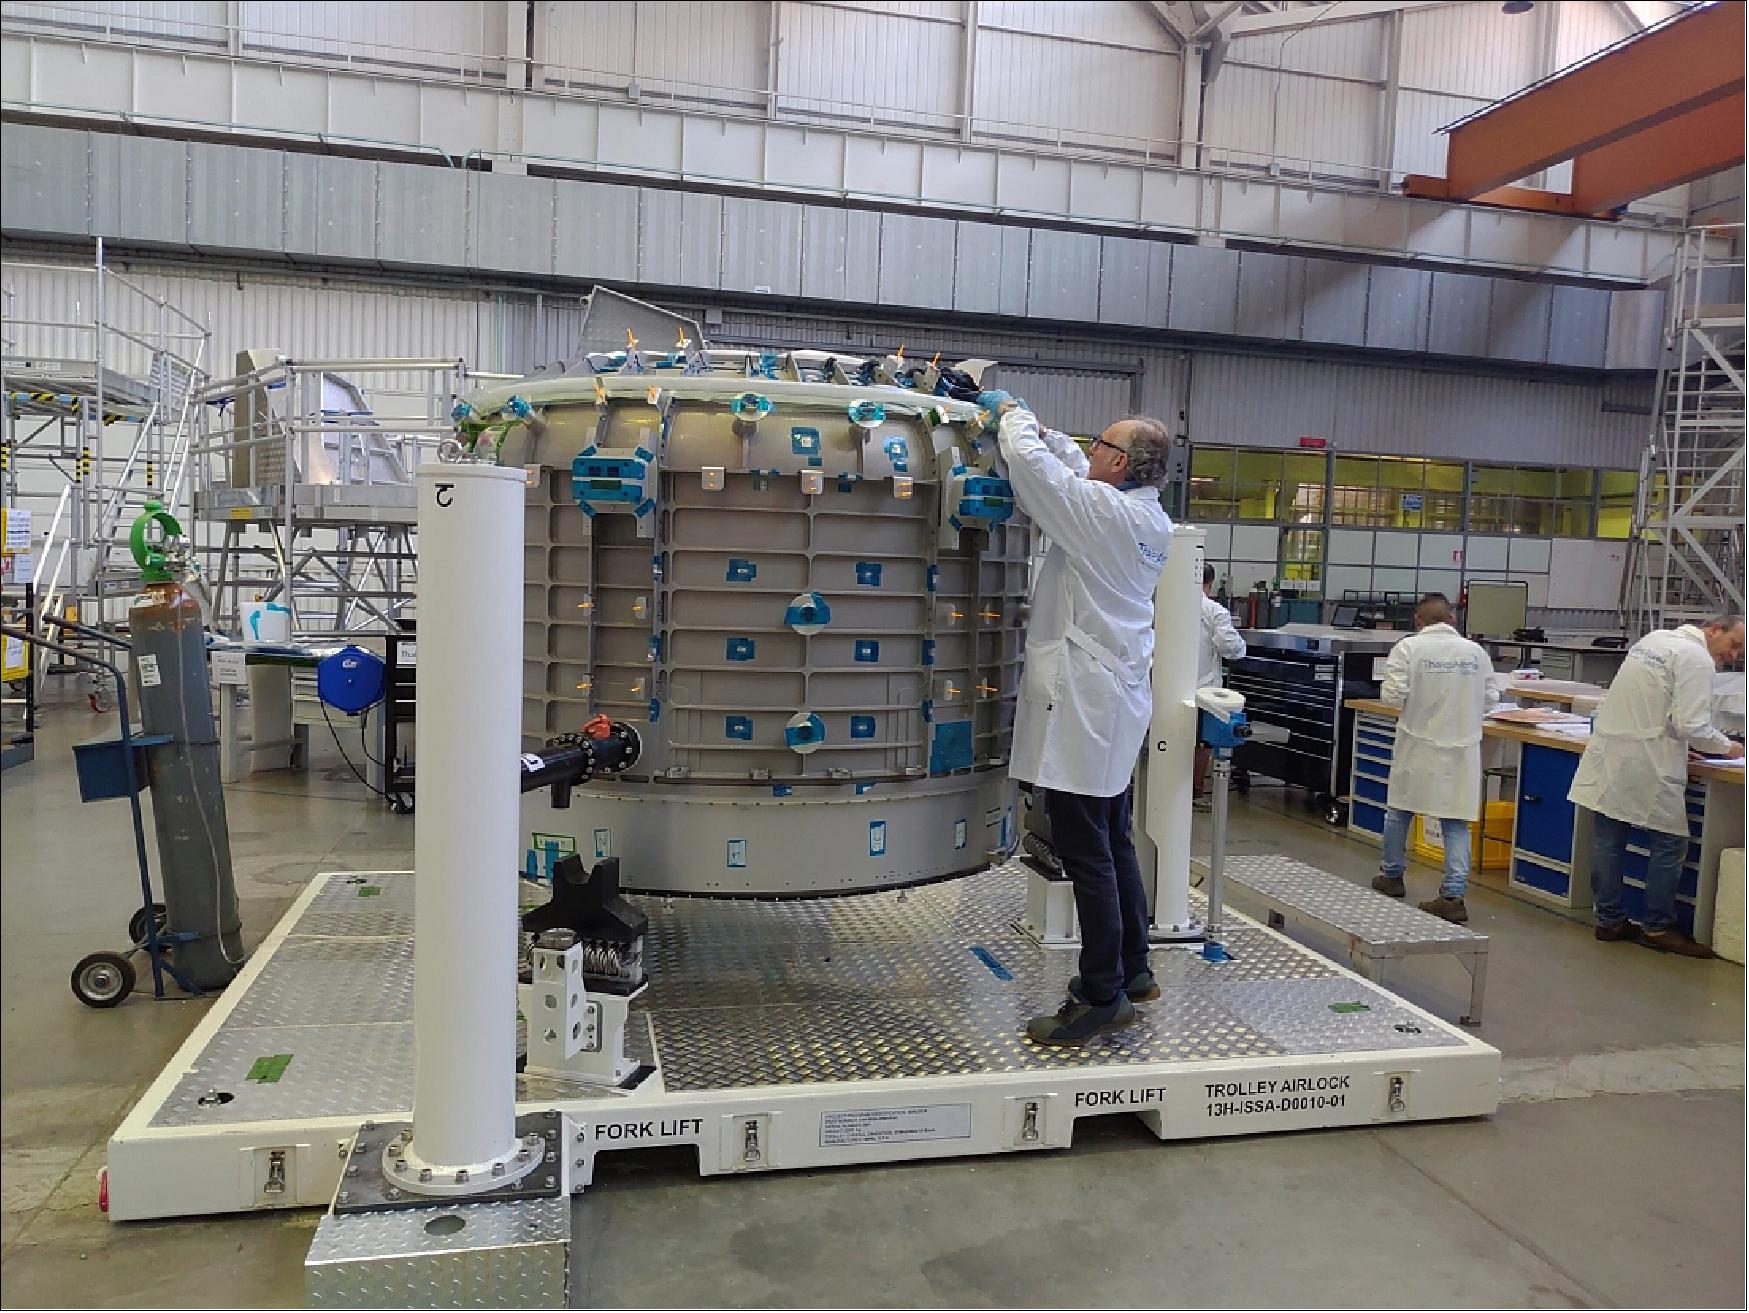 Figure 9: The "Bishop" Airlock Shell ready to ship to NanoRacks (image credit: TAS)